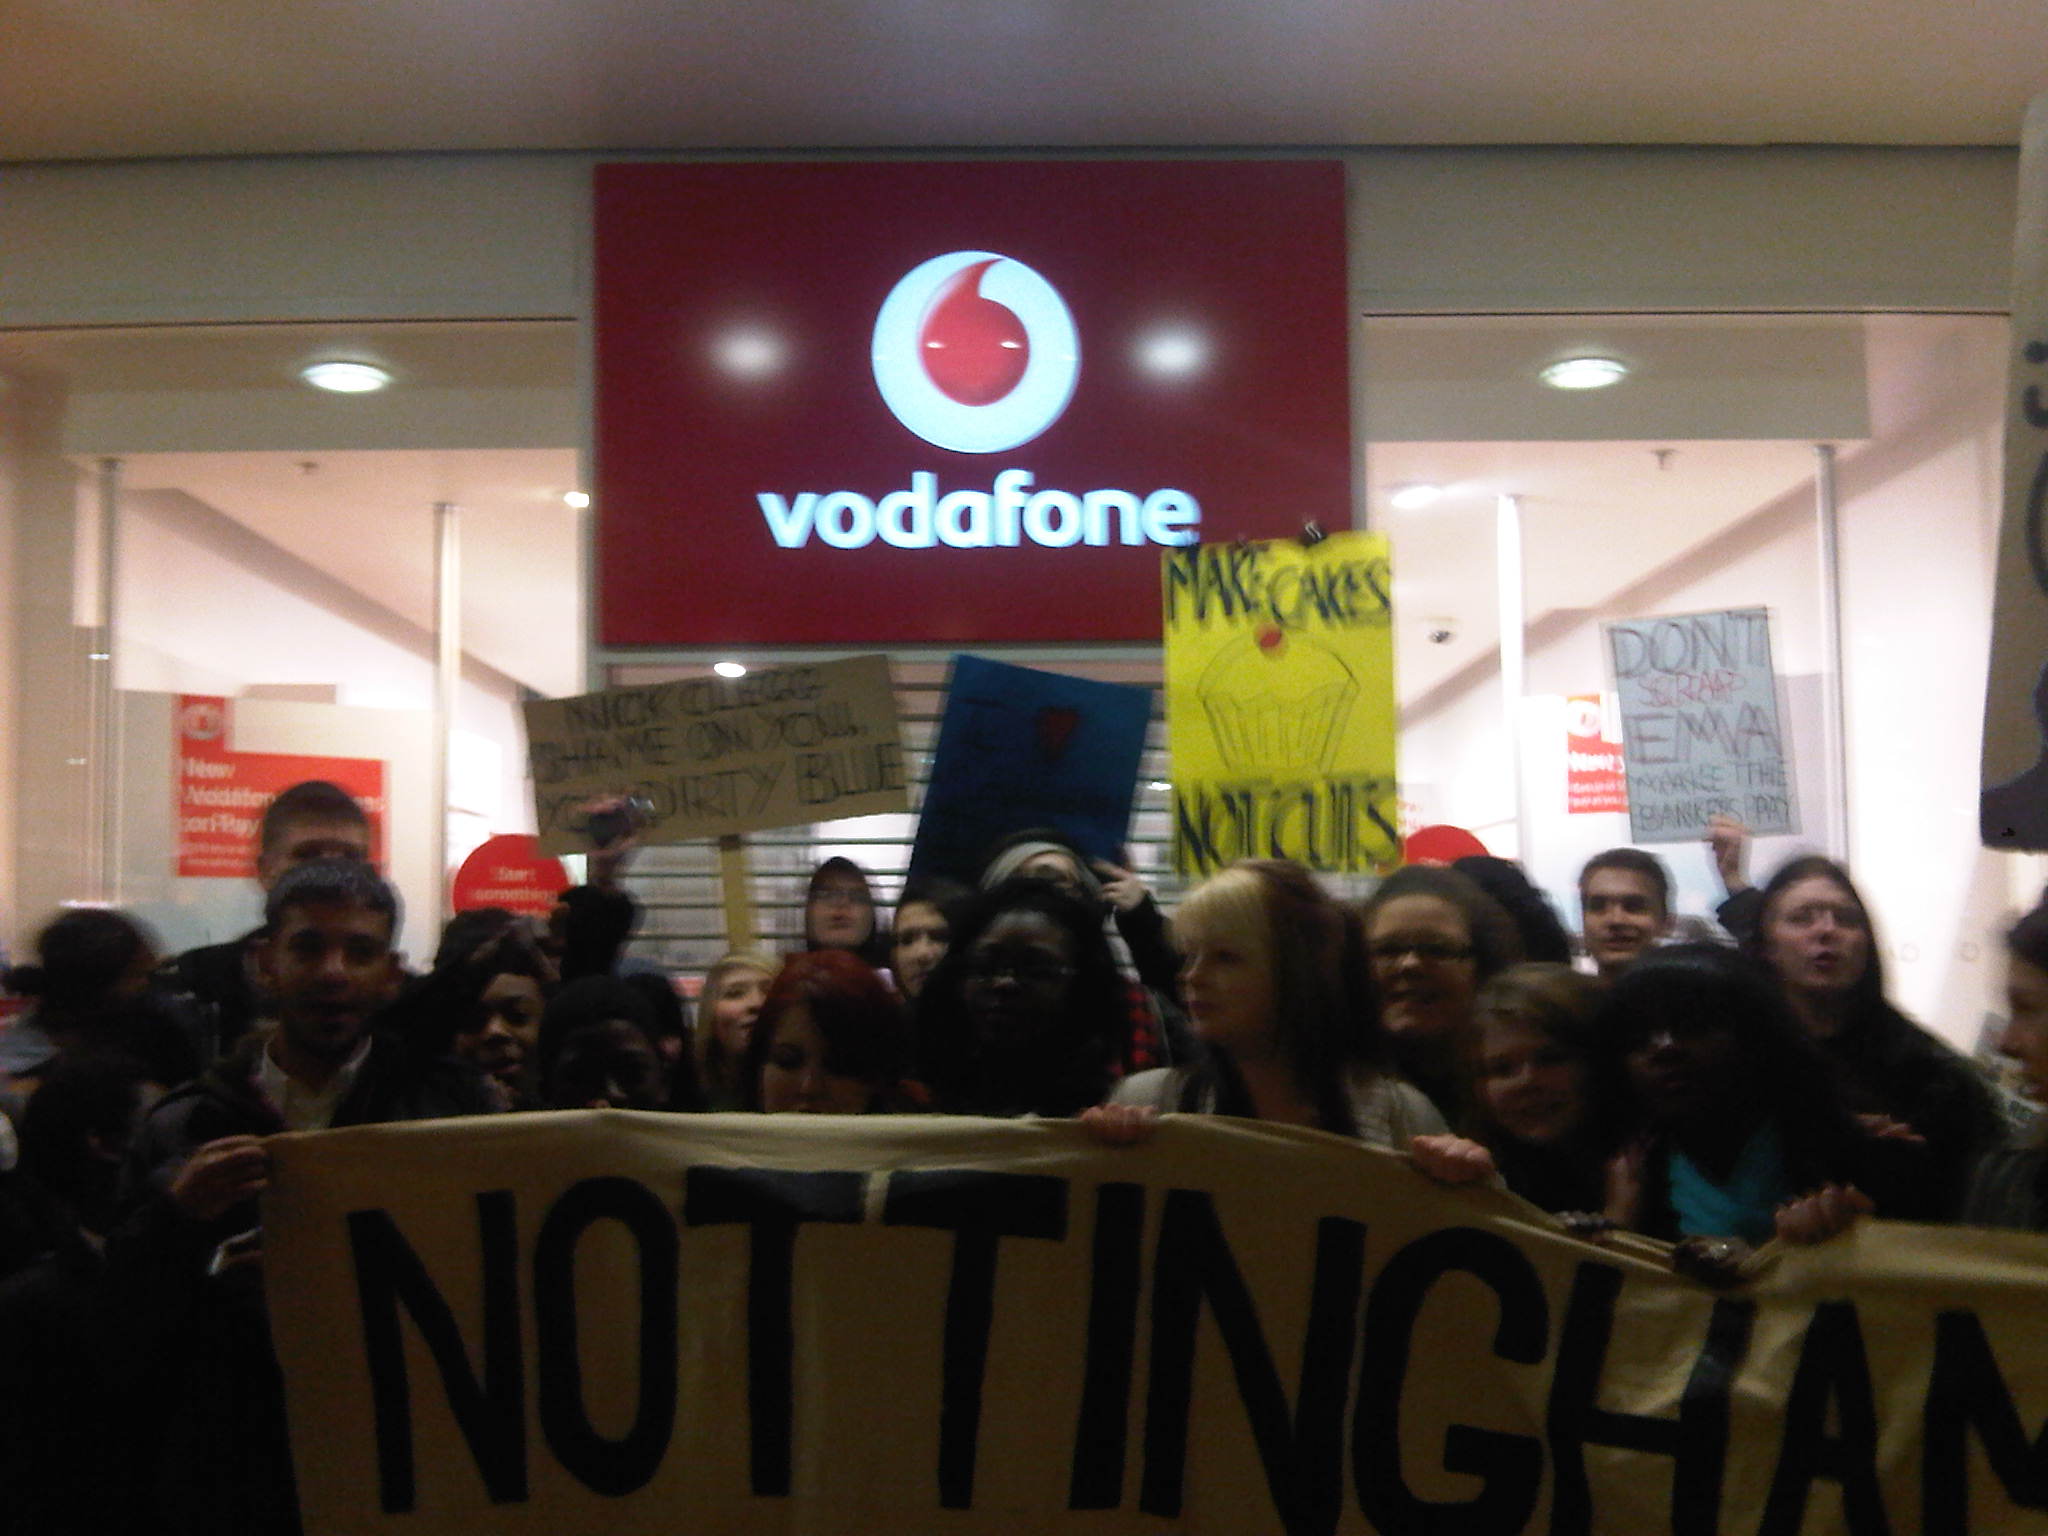 Nottingham students against fees and cuts inside Vodaphone during EMA protest on 11th Jan 2011